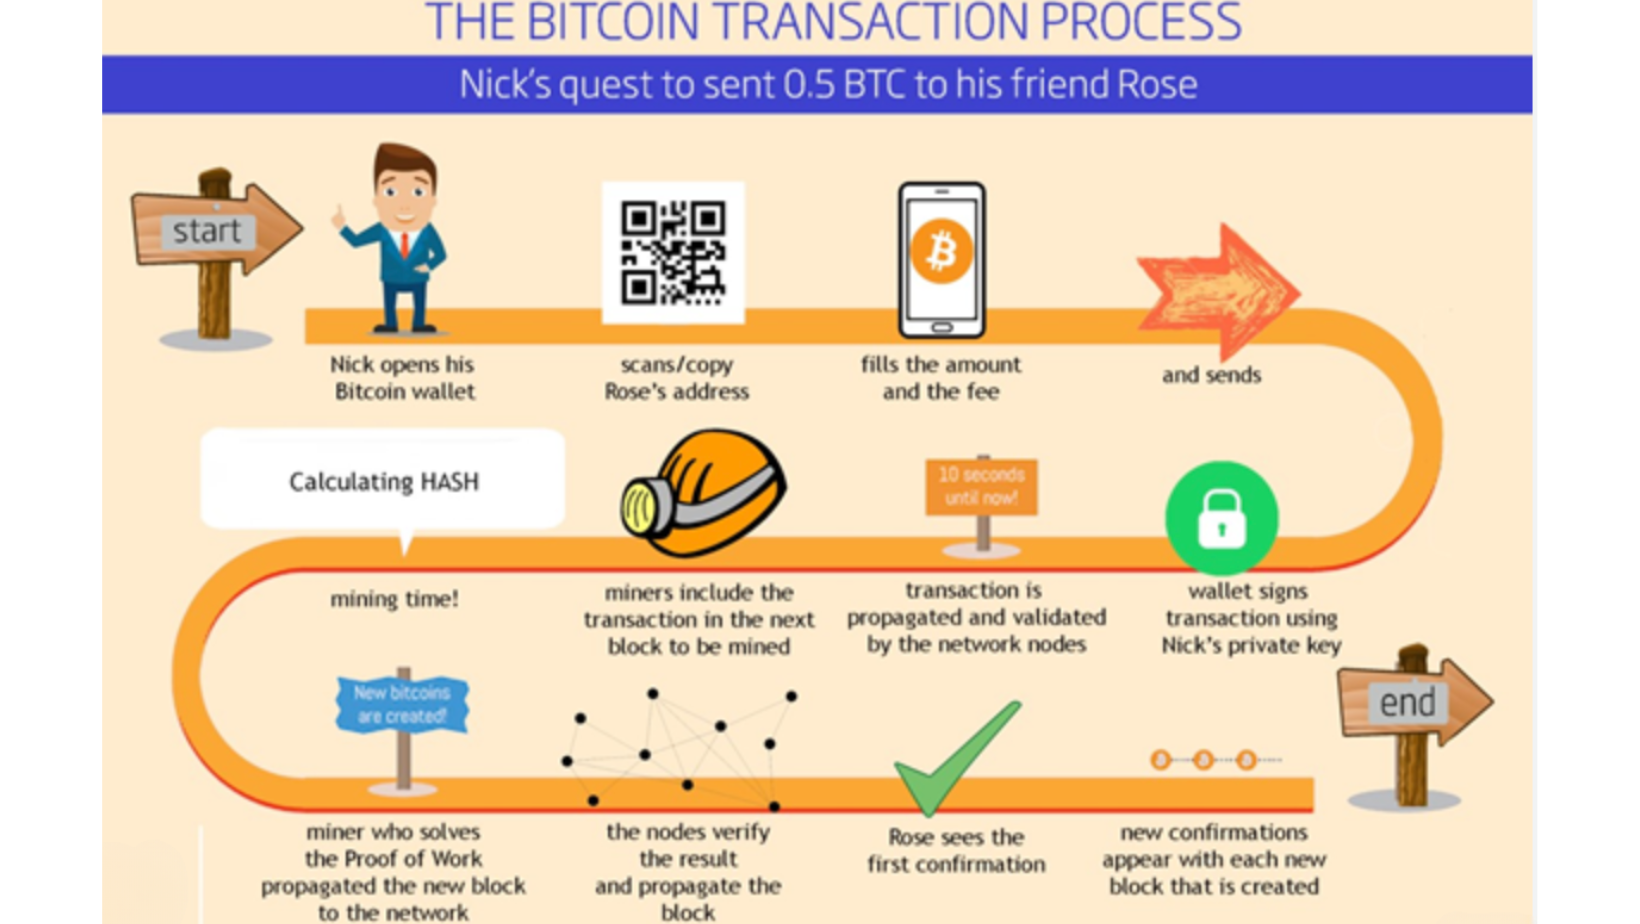 A Complete Guide to Bitcoin Transaction Fees